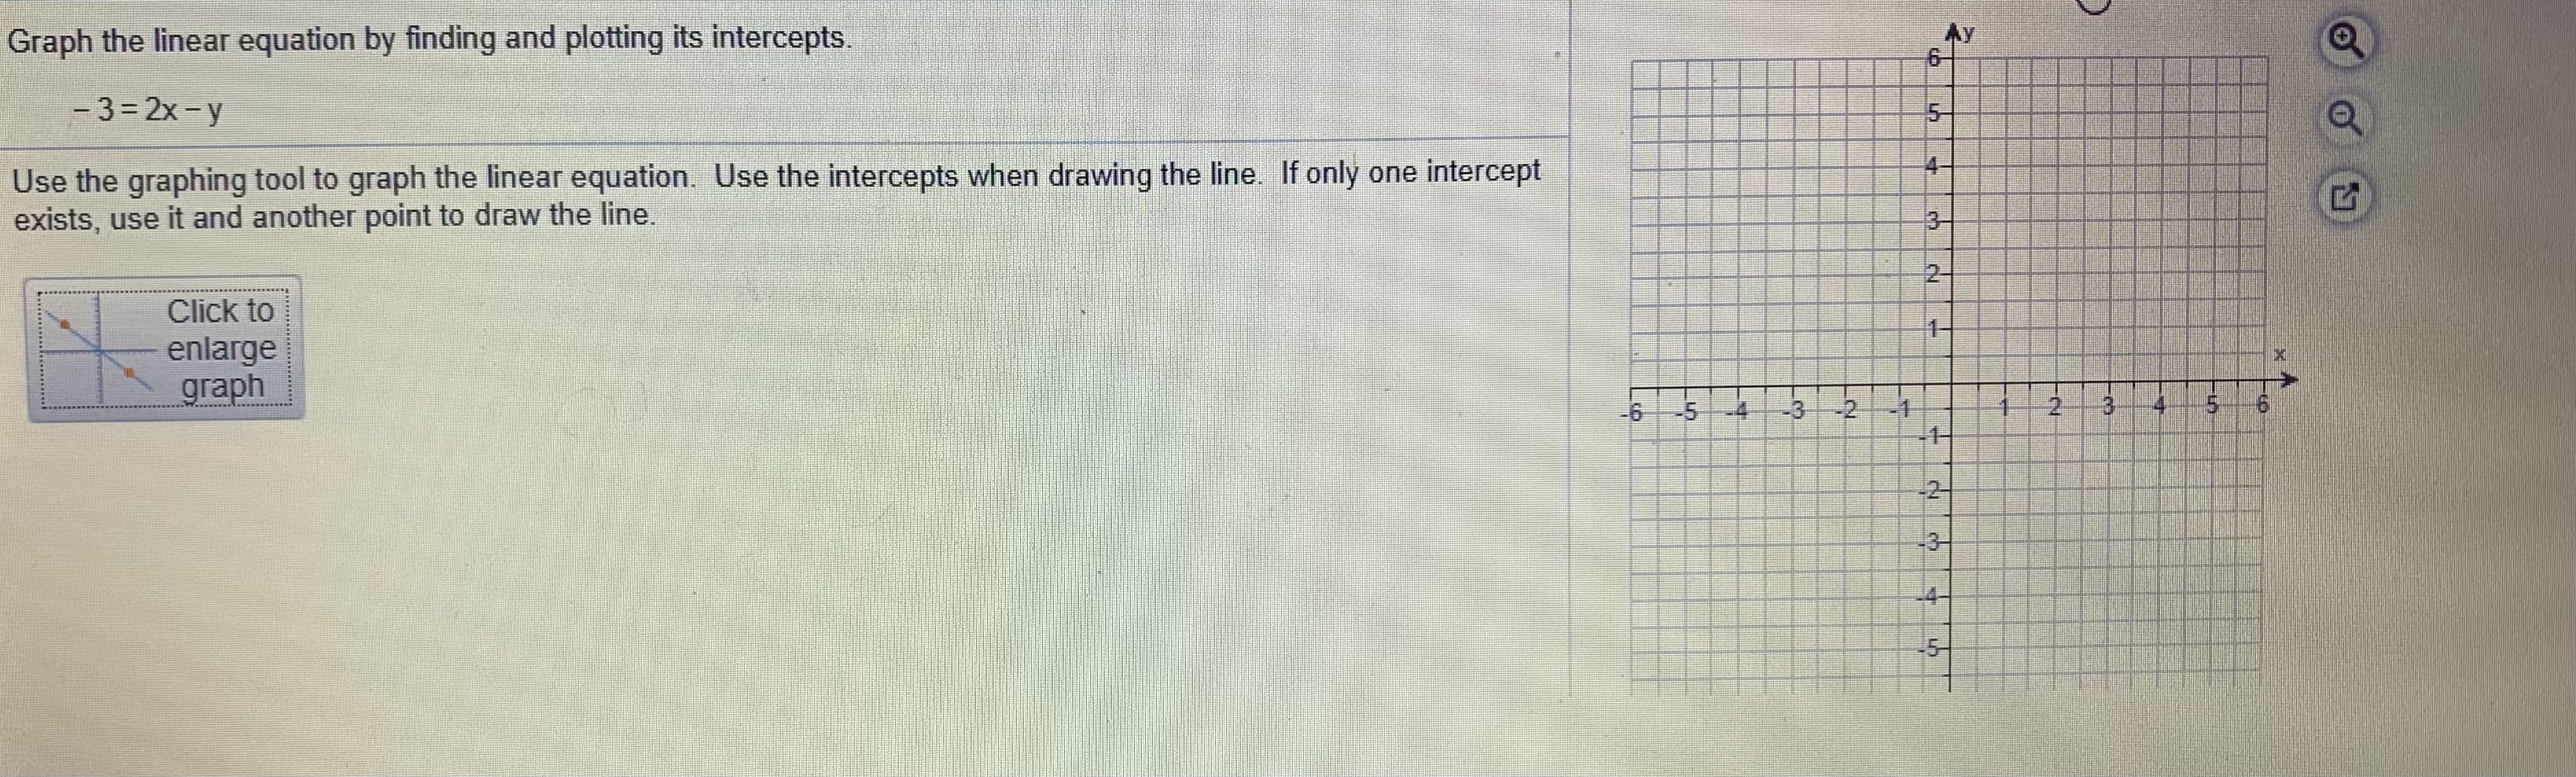 Graph the linear equation by finding and plotting its intercepts.
- 3= 2x- y
Use the graphing tool to graph the linear equation. Use the intercepts when drawing the line. If only one intercept
exists, use it and another point to draw the line.
